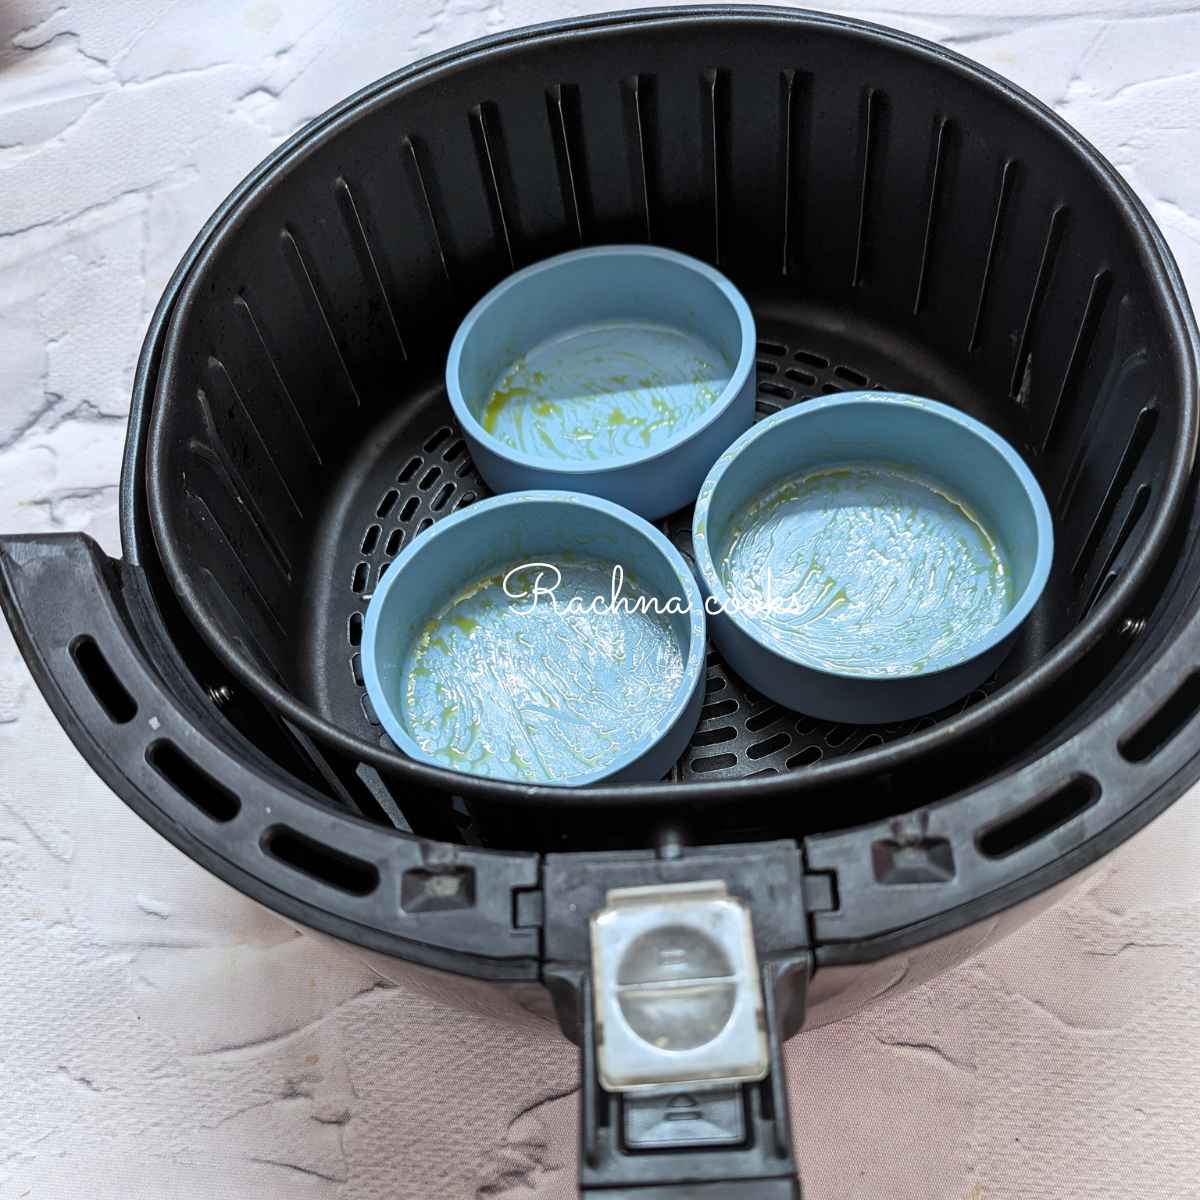 3 silicone molds placed in air fryer basket.